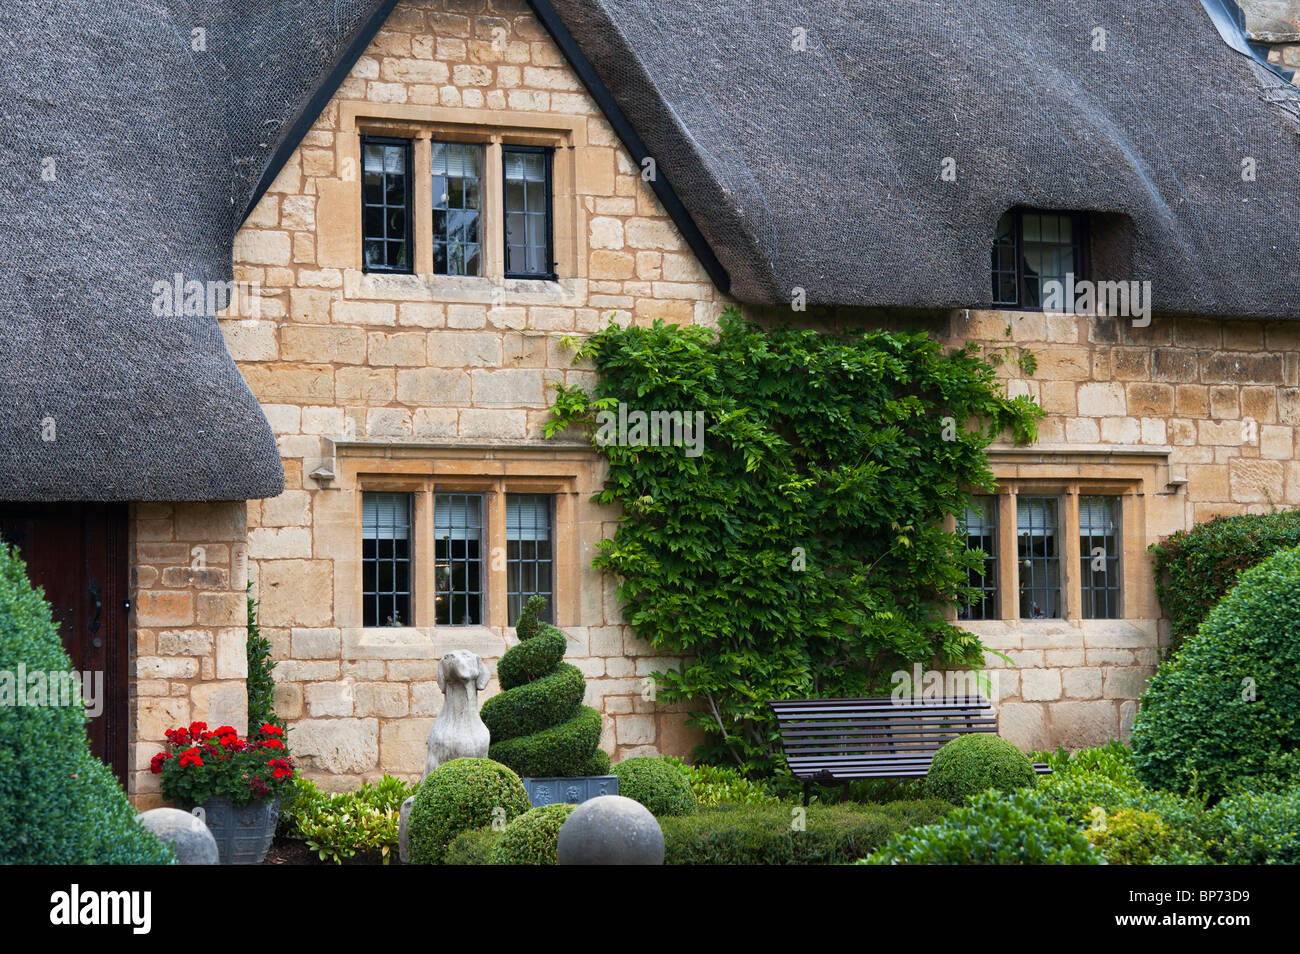 Cotswold stone thatched cottage, Chipping Campden, Cotswolds, England Stock Photo